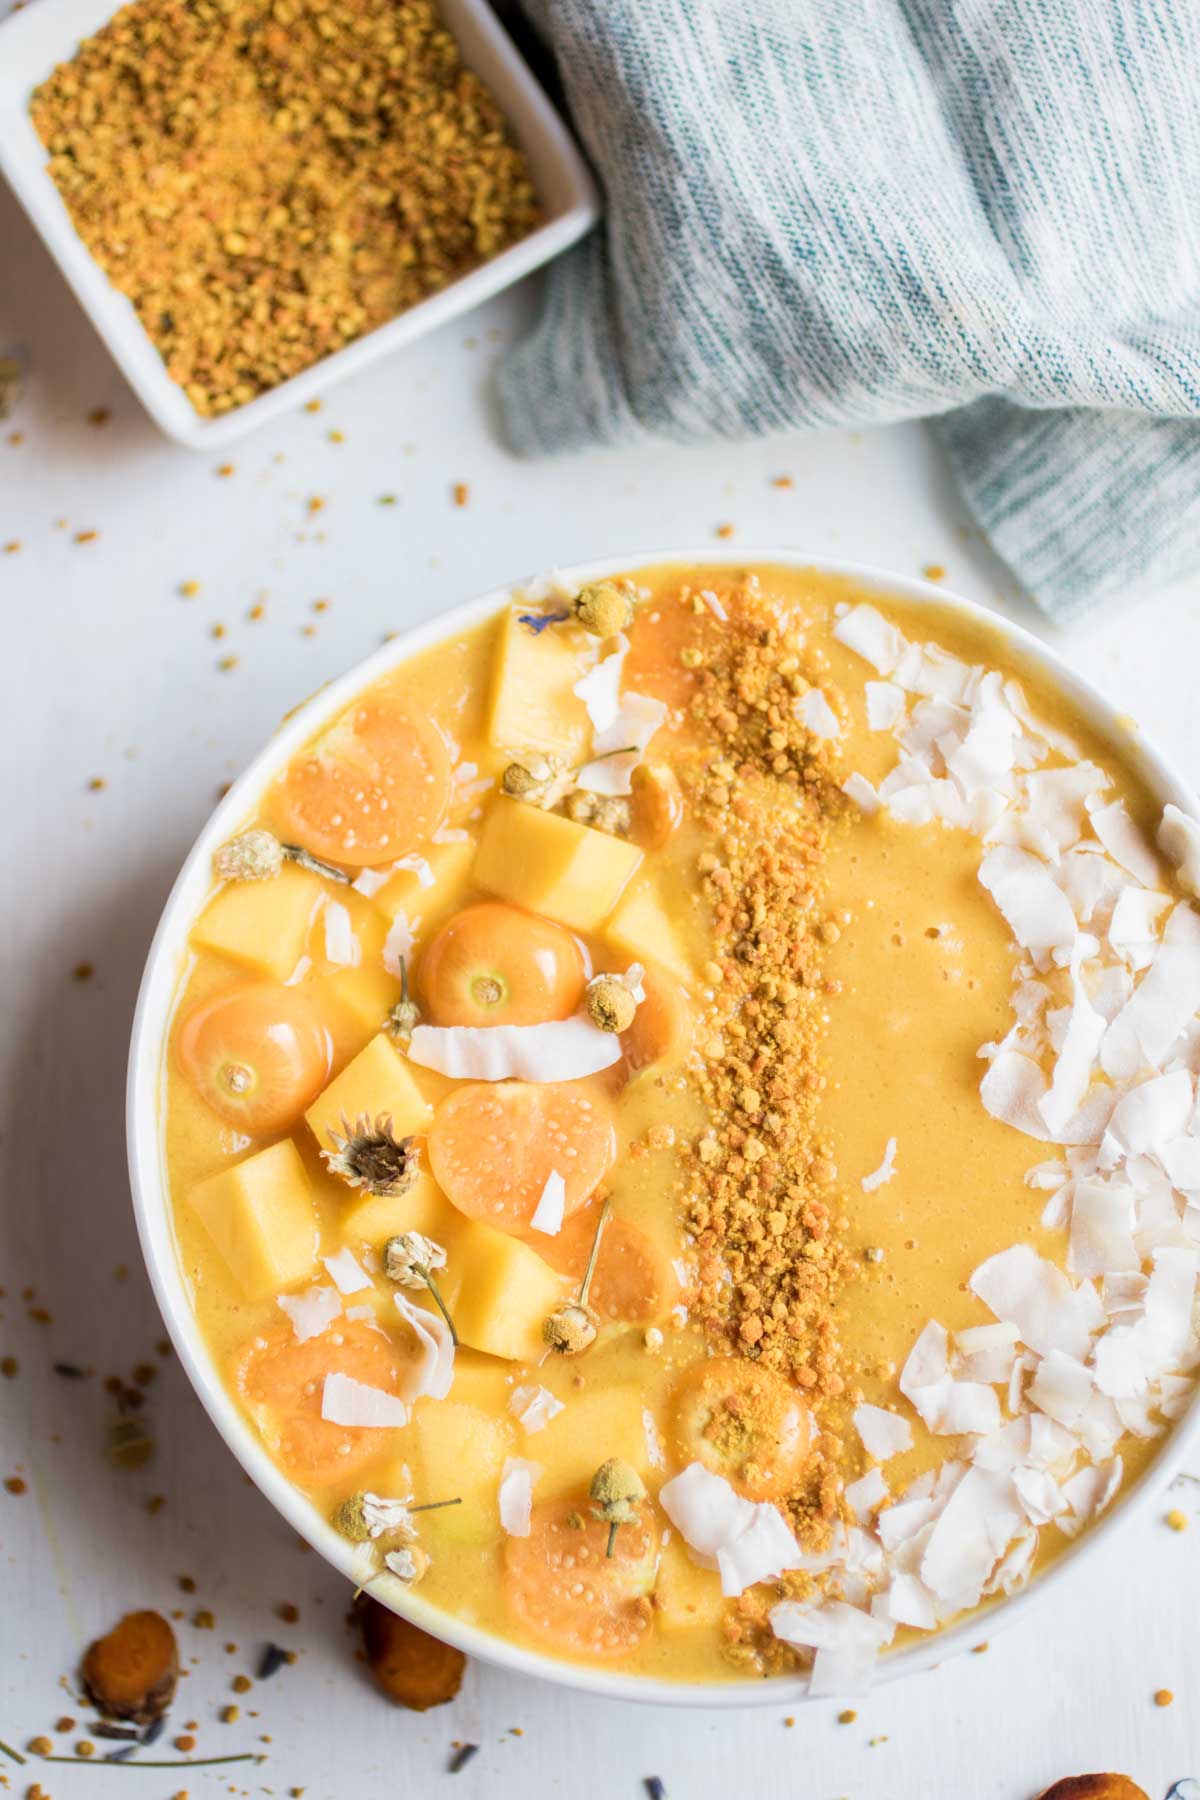 Fresh turmeric smoothie bowl, the perfect morning treat! Banana free! The creamy base is cauliflower, mango, lemon, orange, and a few other superfood ingredients to help you beat those seasonal allergies. So yummy!